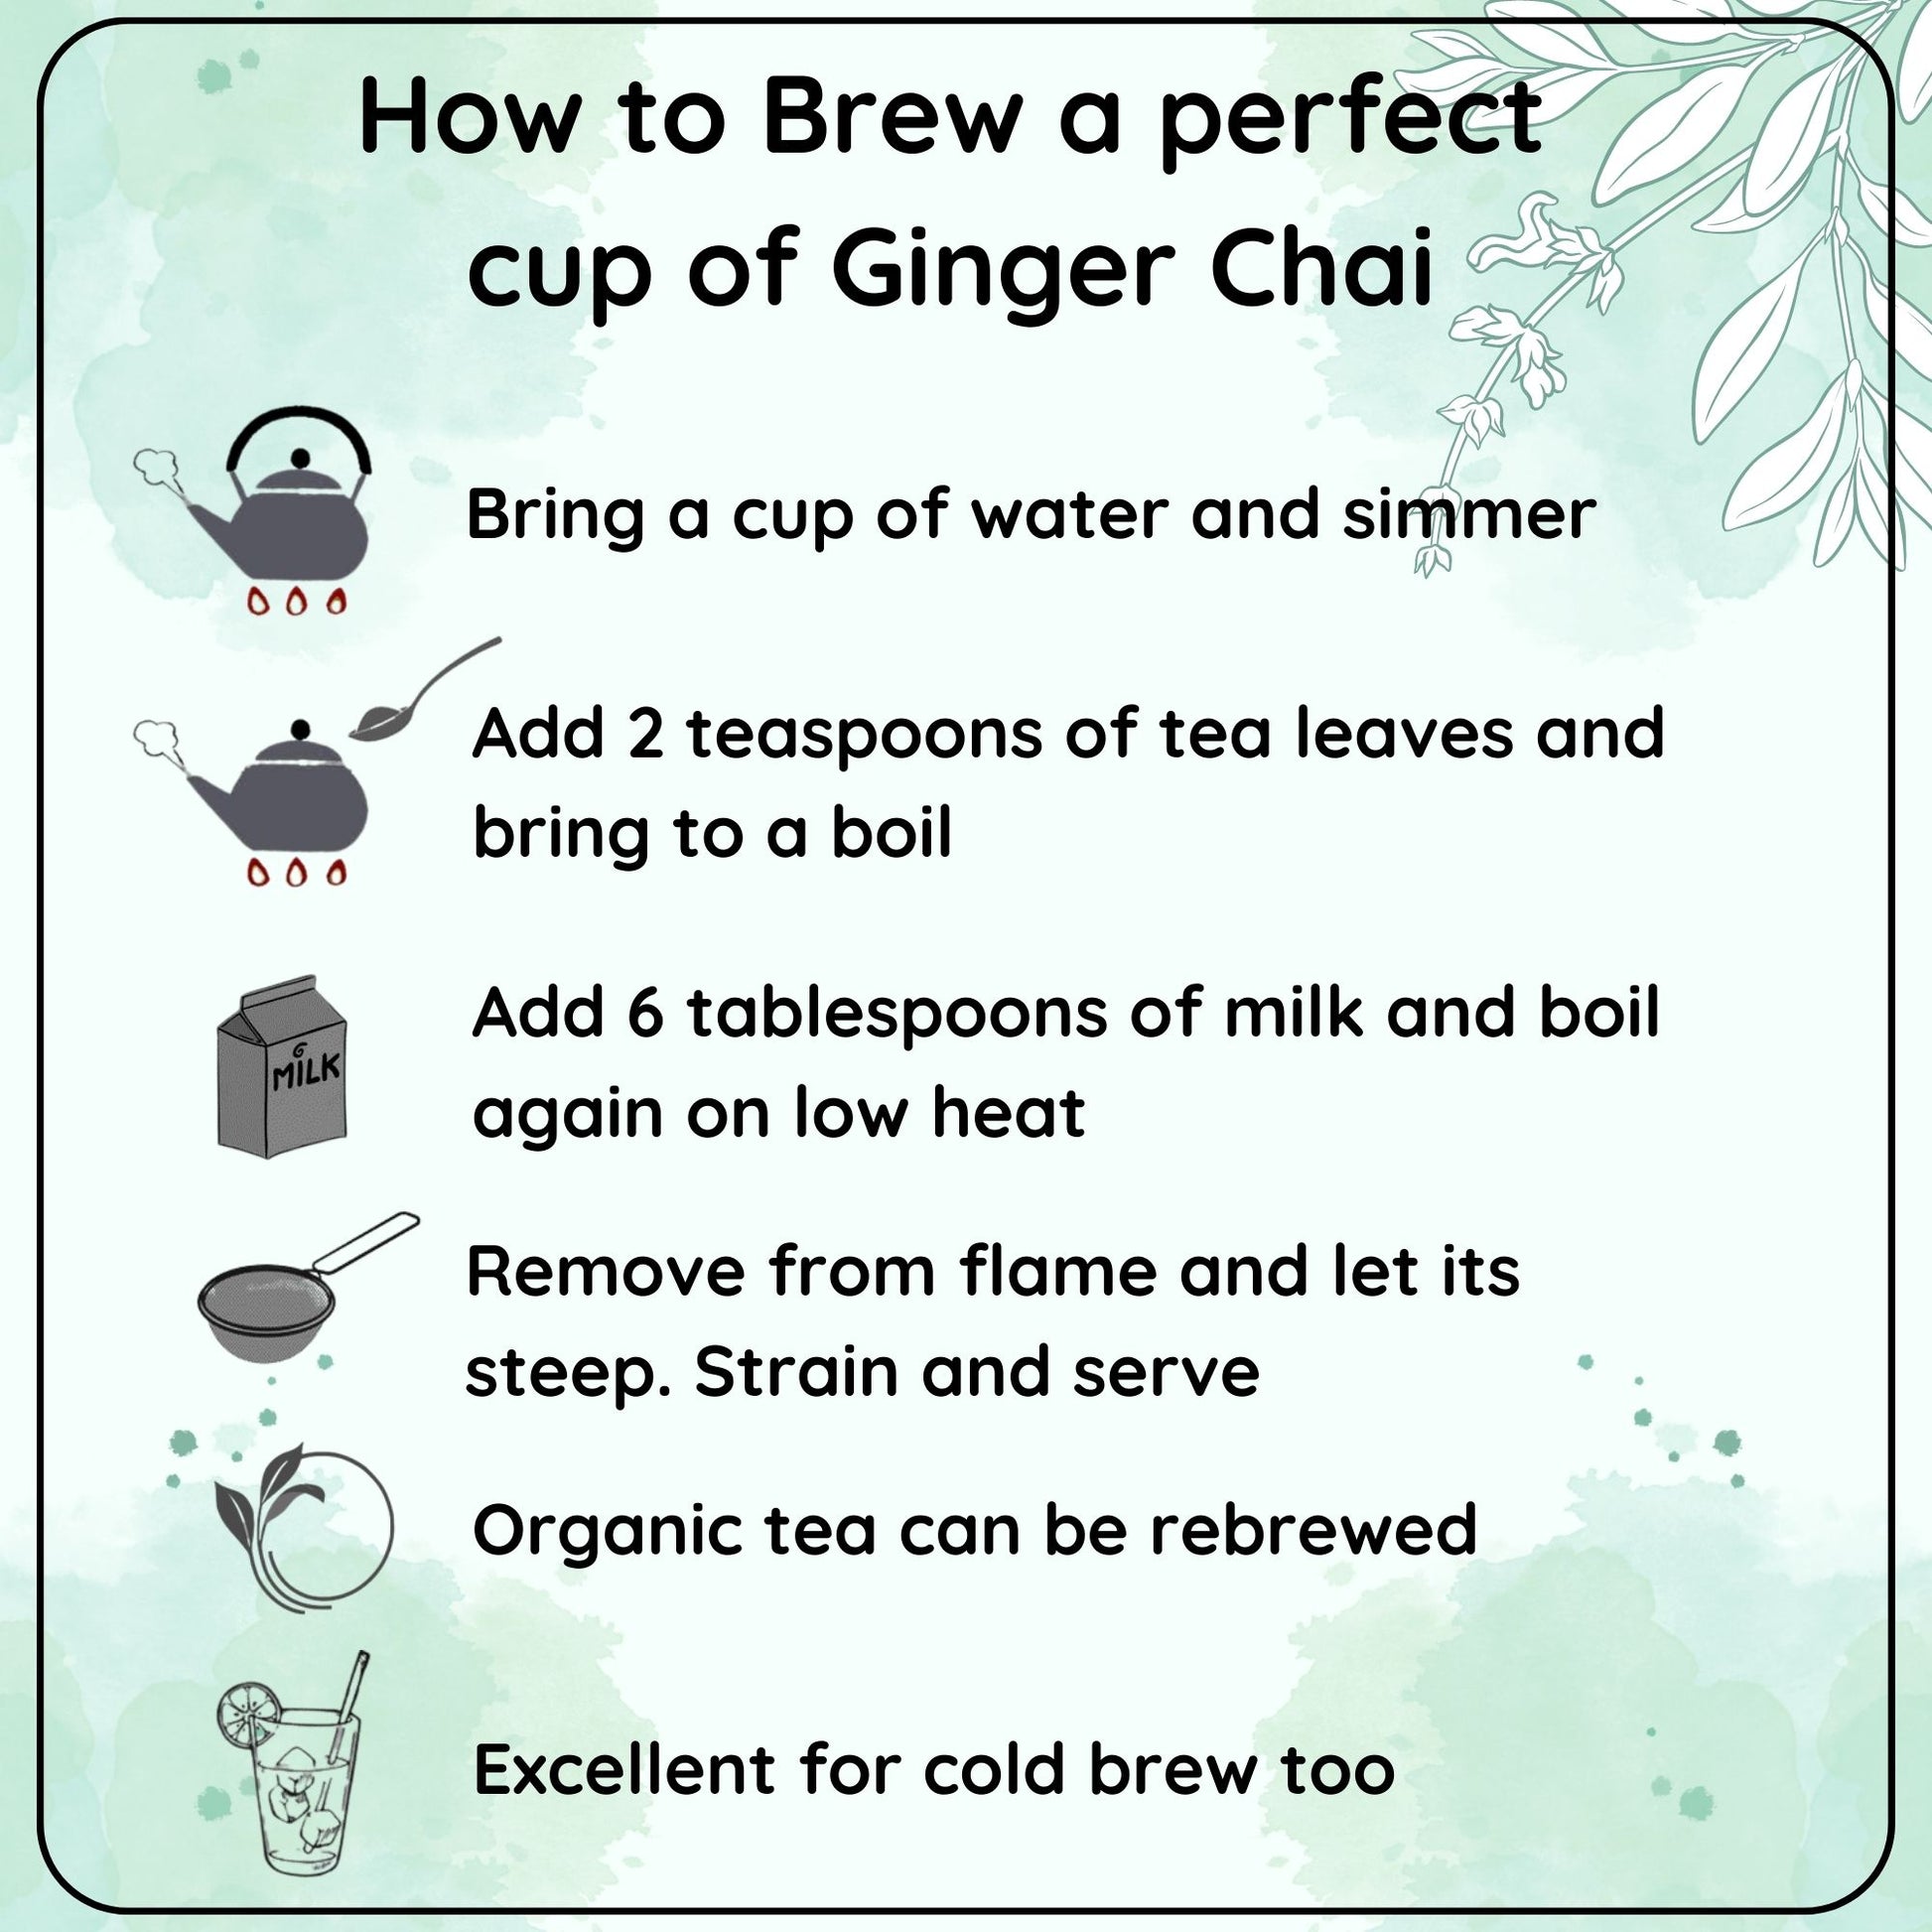 ZESTFUL Ginger Chai - The Benefits of Zestful Ginger Chai for Your Health and Wellness - Radhikas Fine Teas and Whatnots